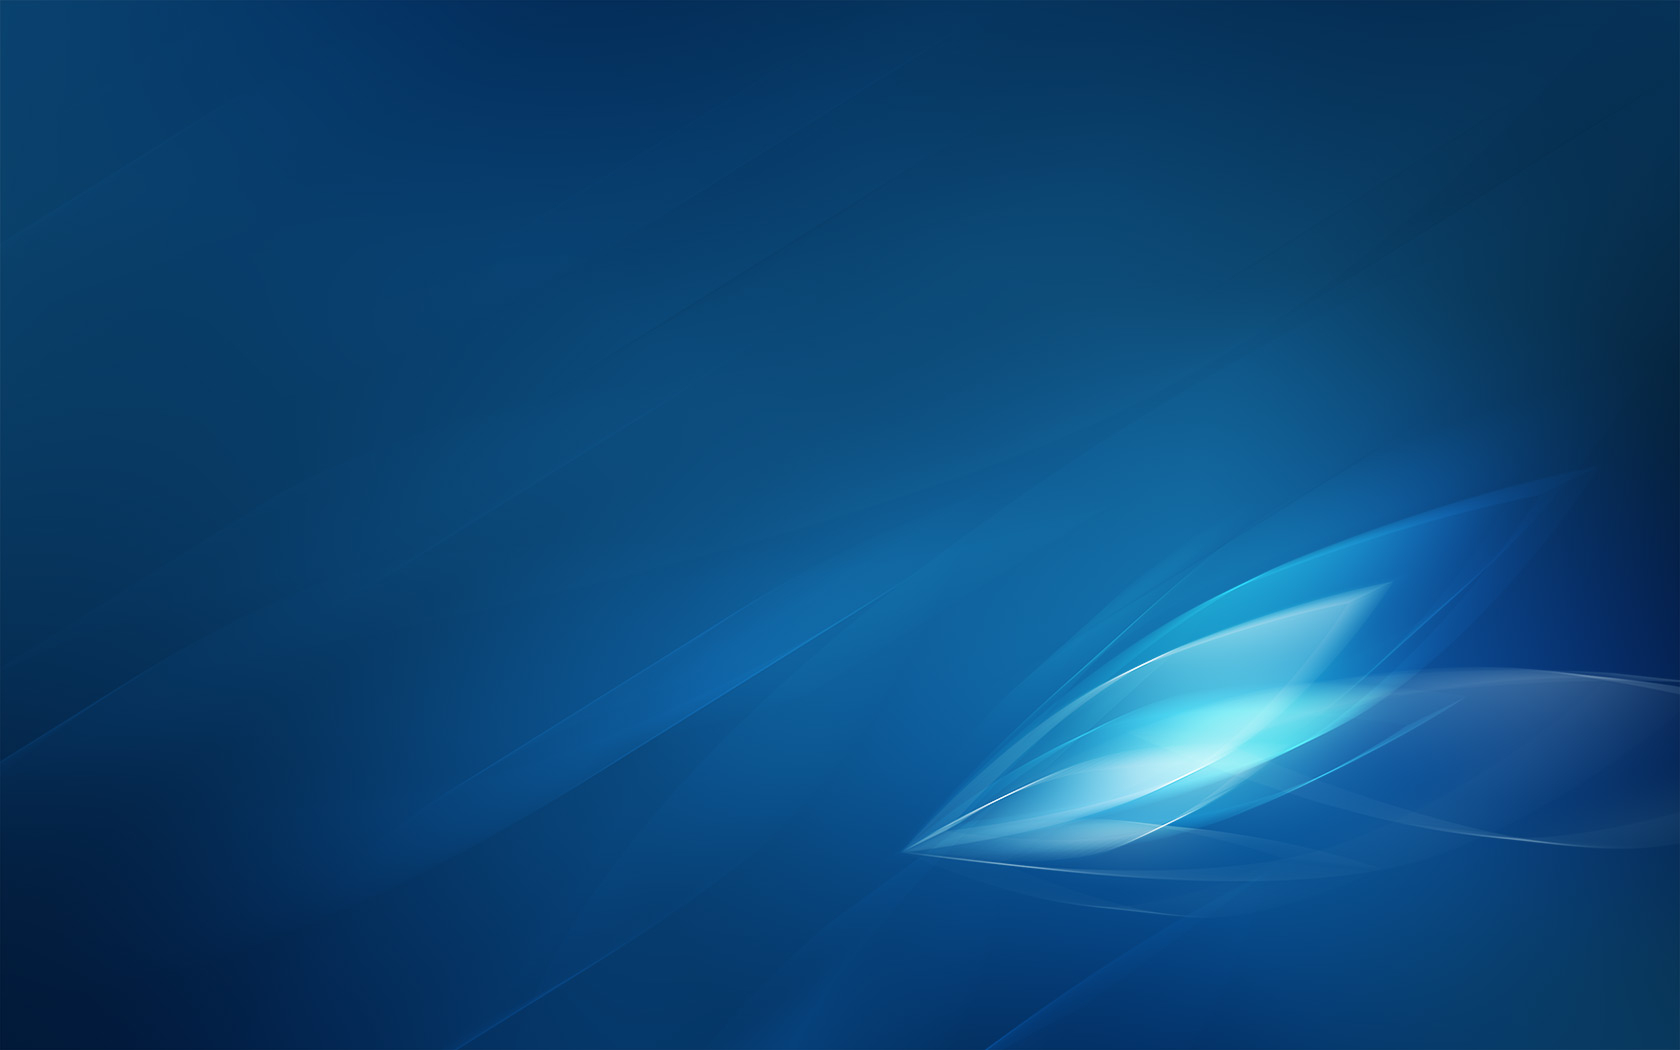 Abstract 3057 Hd Wallpapers in Abstract   Imagescicom